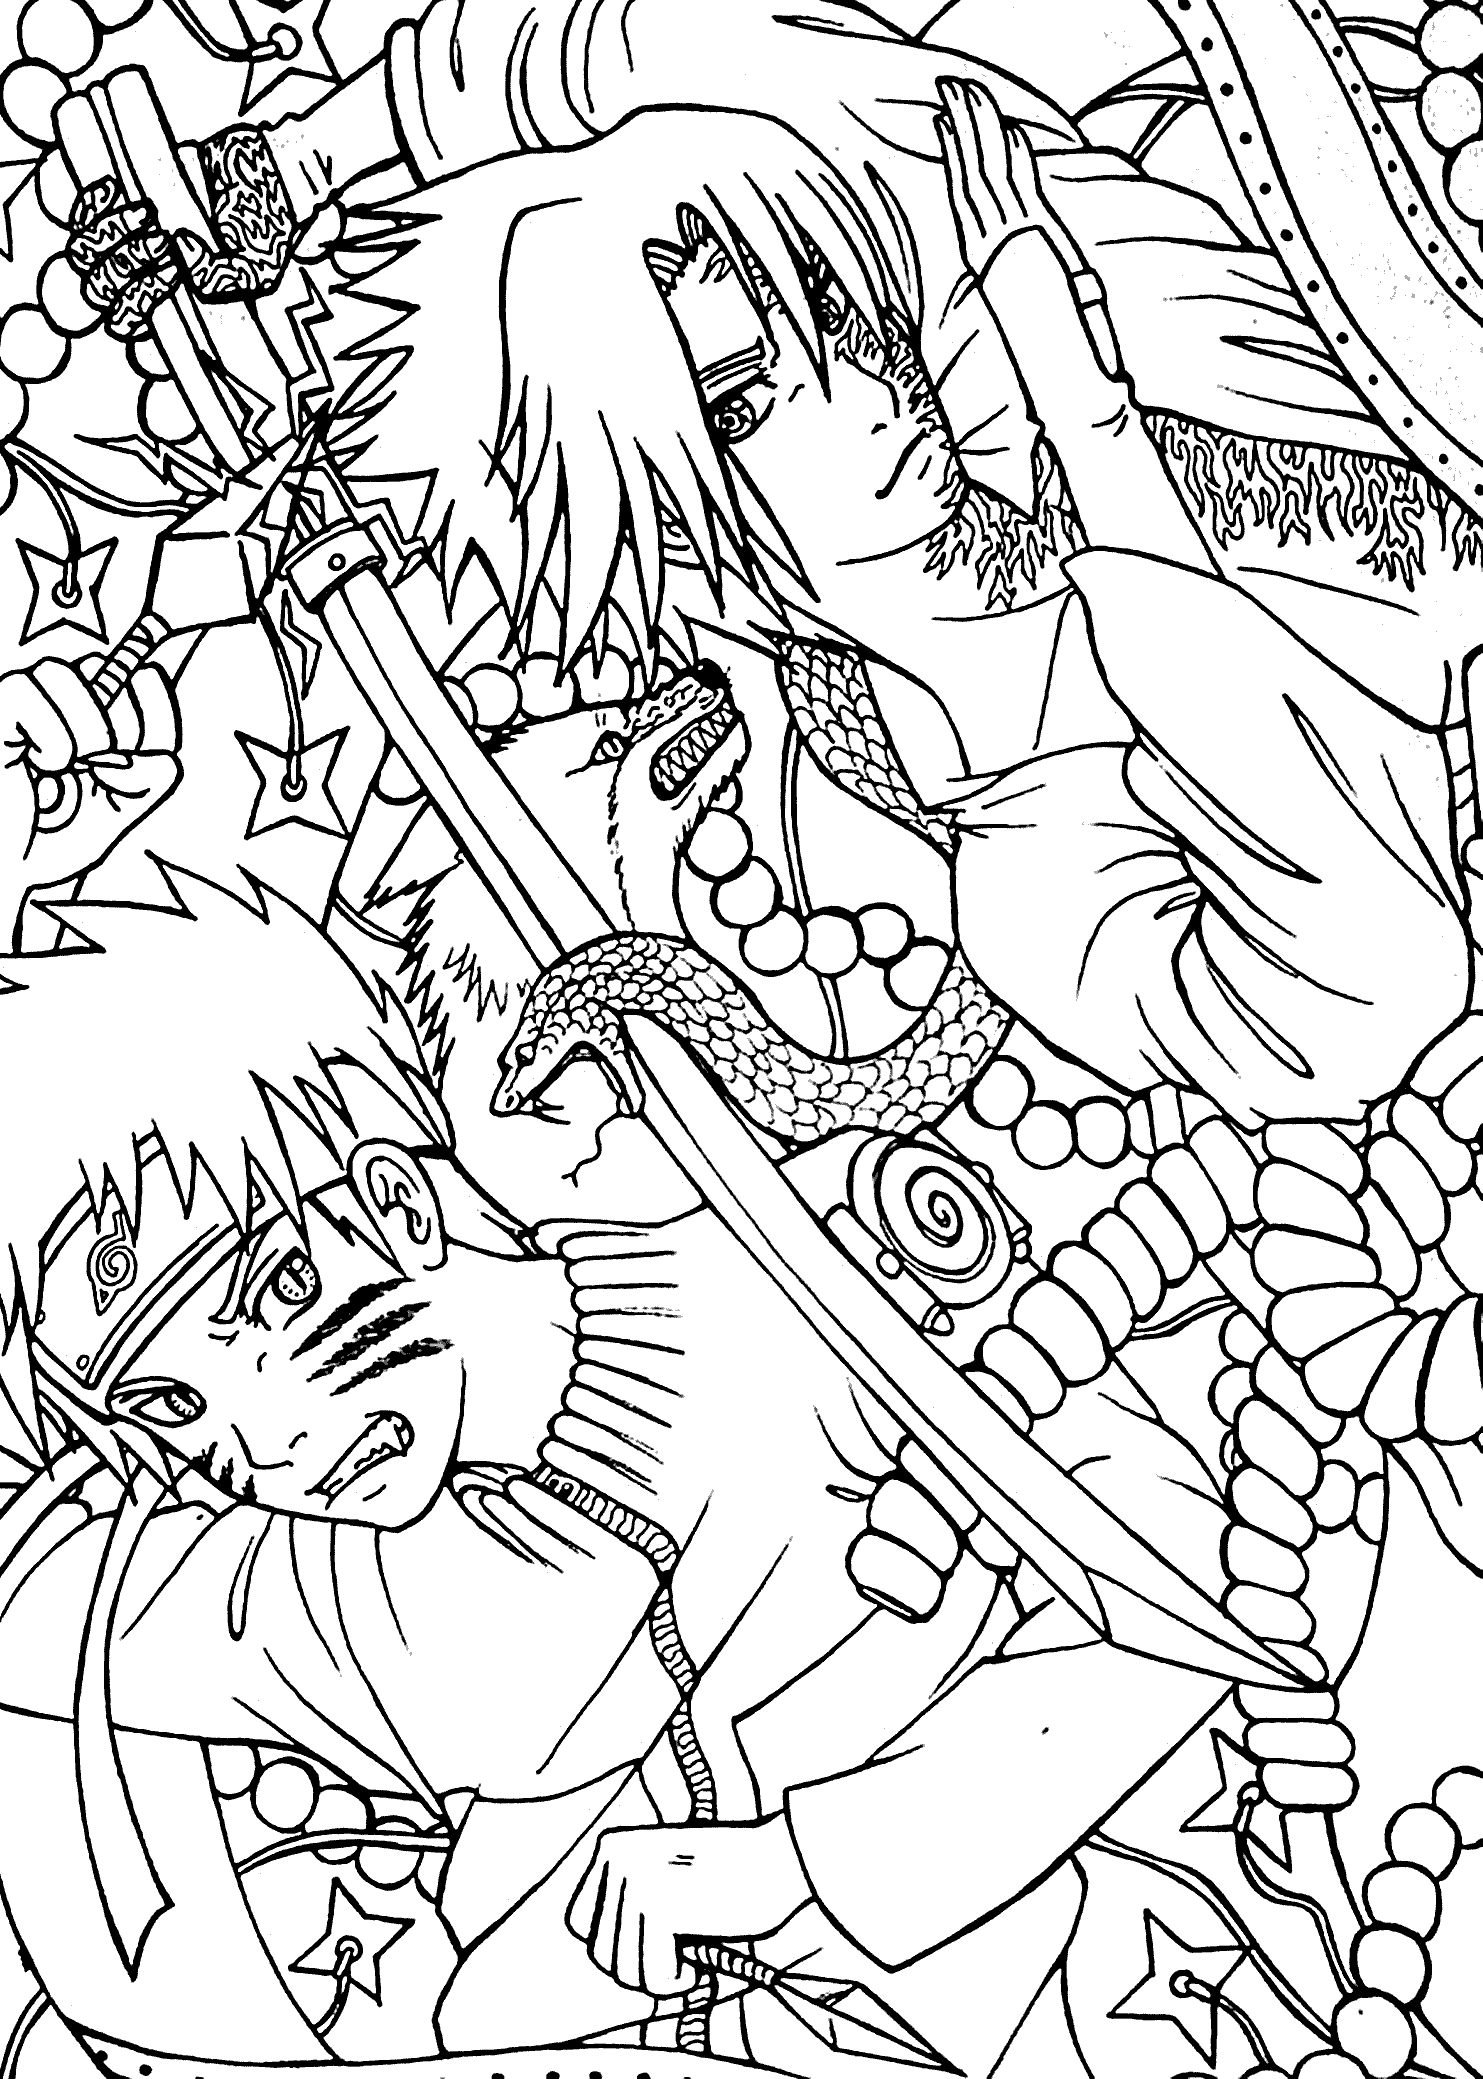 Black Naruto Coloring Pages - Coloring Pages For All Ages